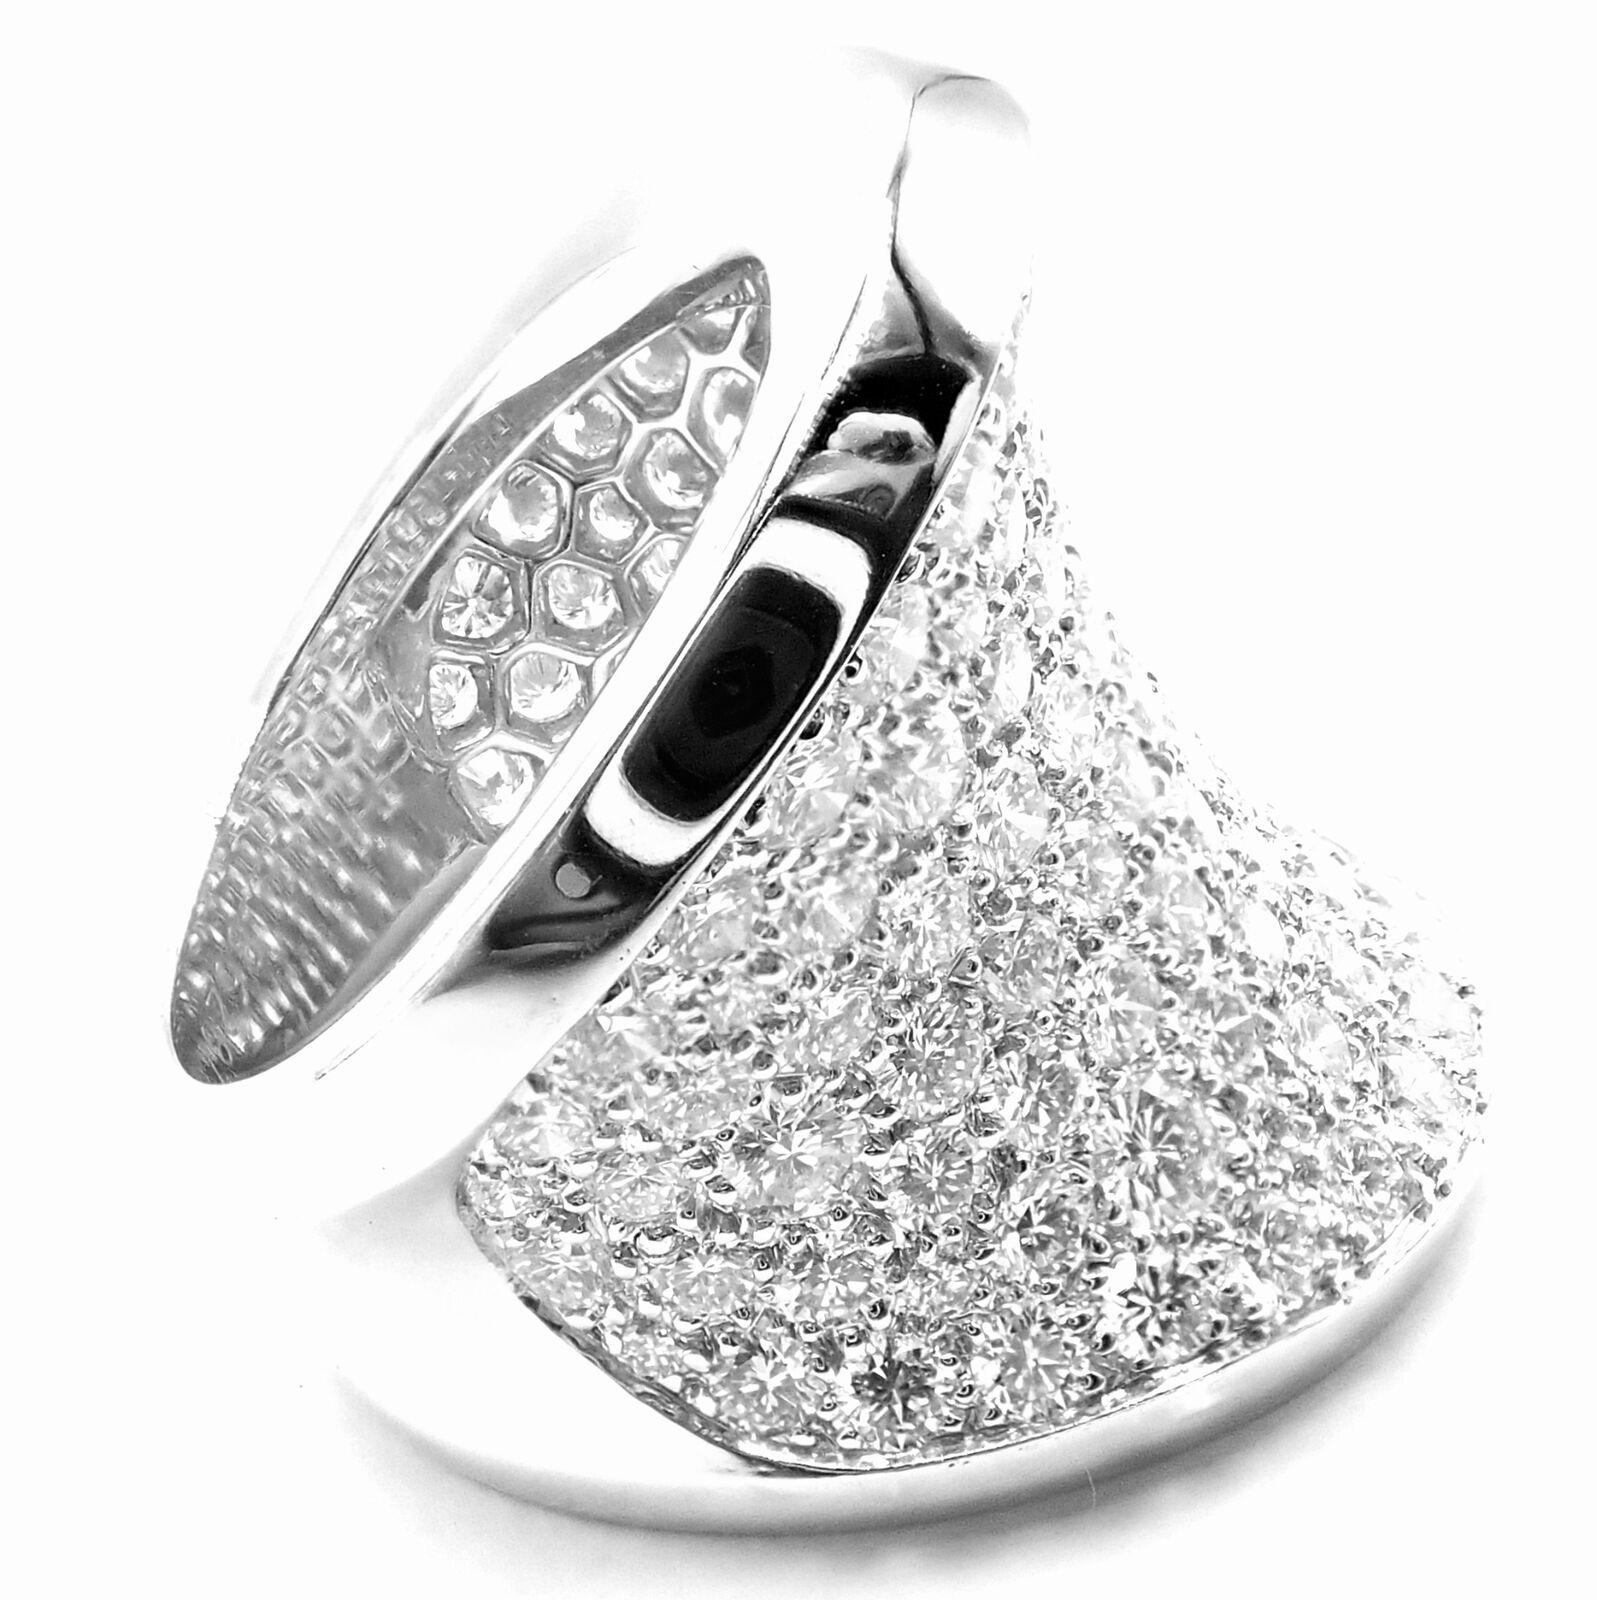 18k White Gold Chalice Diamond Large Ring by Cartier.
With 127 Round Brilliant cut, total weight 6.60ct E color VVS1 clarity
This absolutely gorgeous ring comes with a Cartier service paper and a Cartier box.
Details:
Ring Size: European 62 US